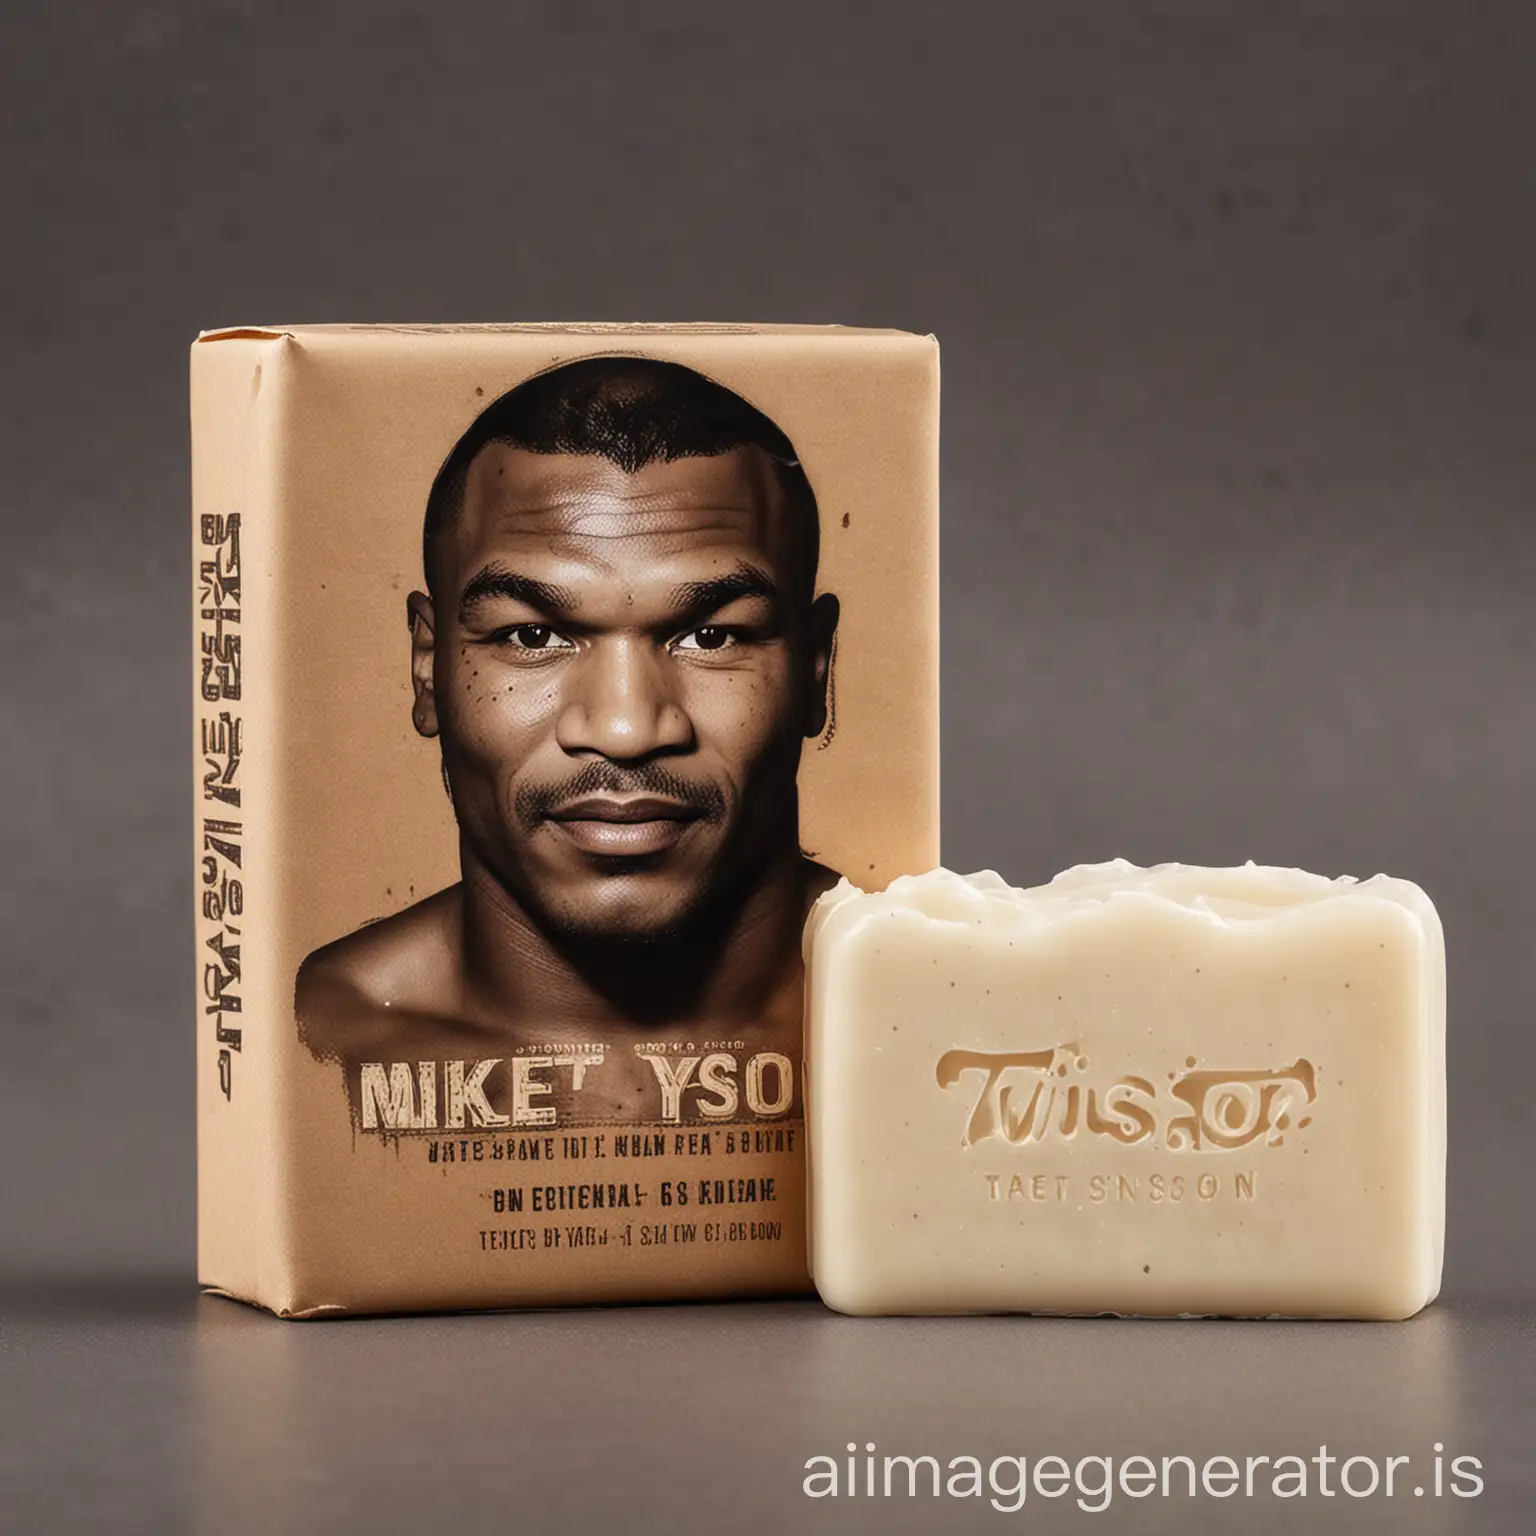 Mike-Tyson-Branding-Soap-Celebrity-Promoting-Personal-Hygiene-Product